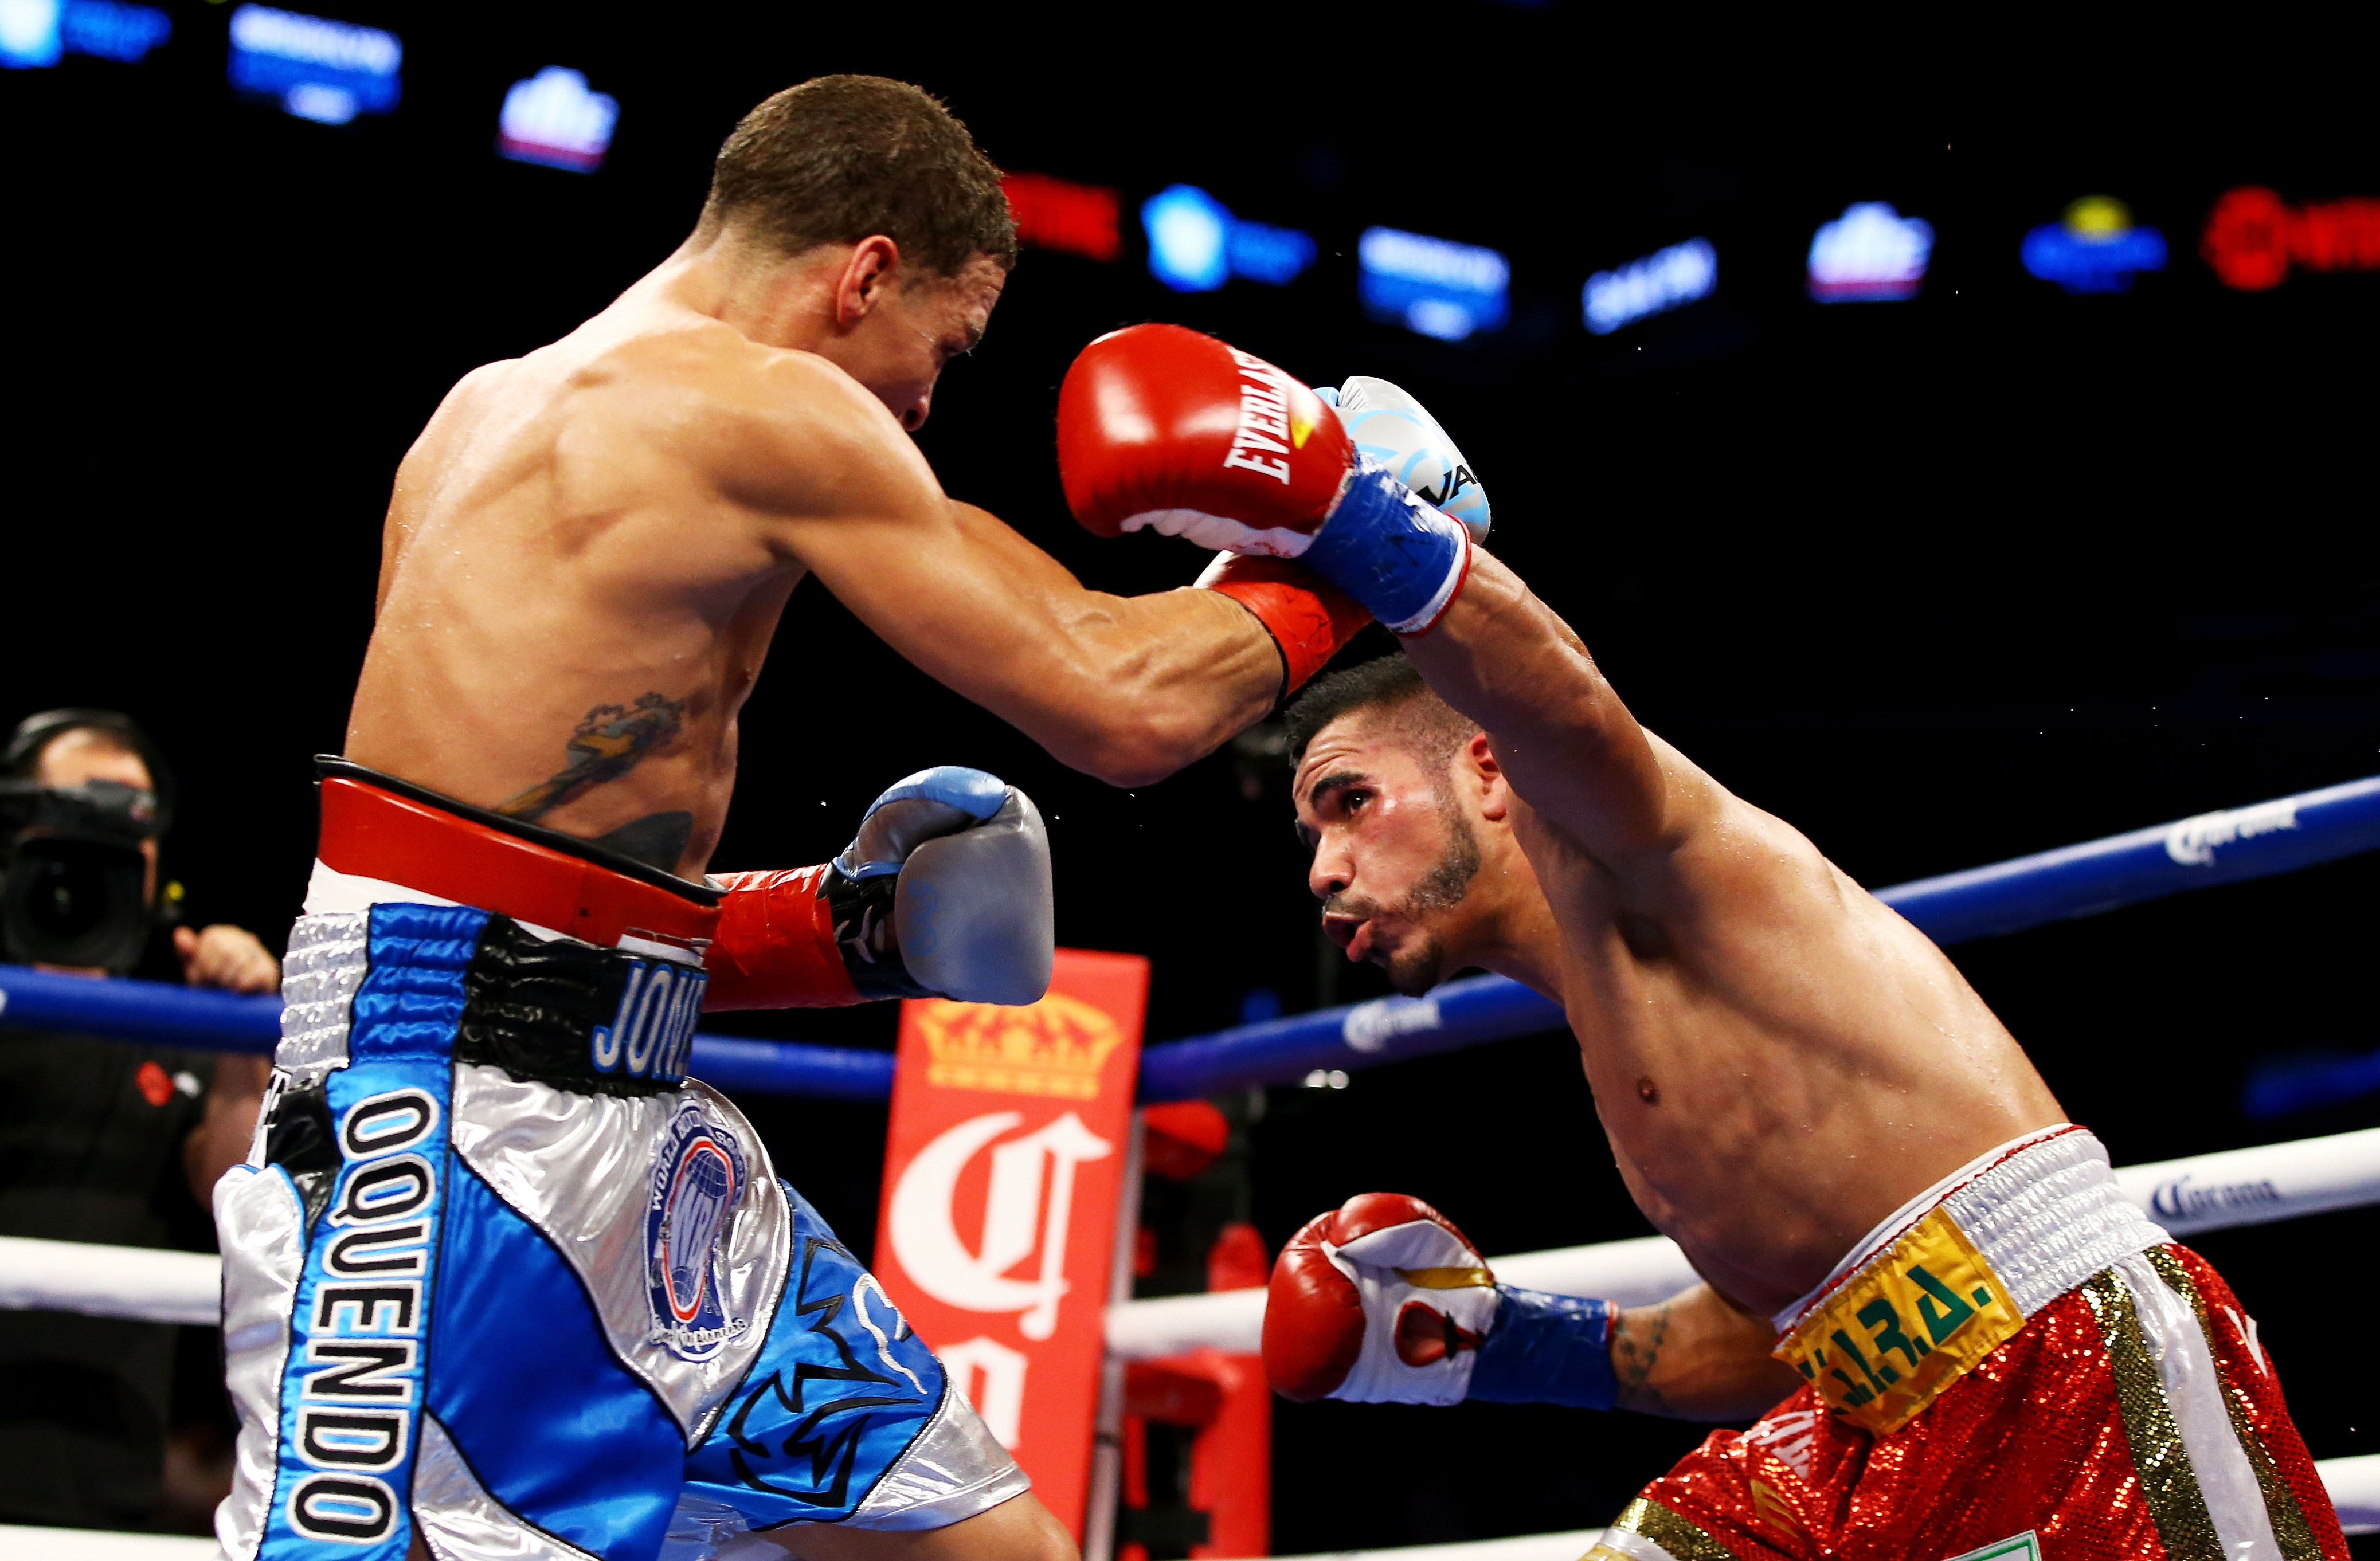  Jesus Cuellar (R) of Argentina punches Jonathan Oquendo of Puerto Rico during their WBA Featherweight Championship bout. (Getty)